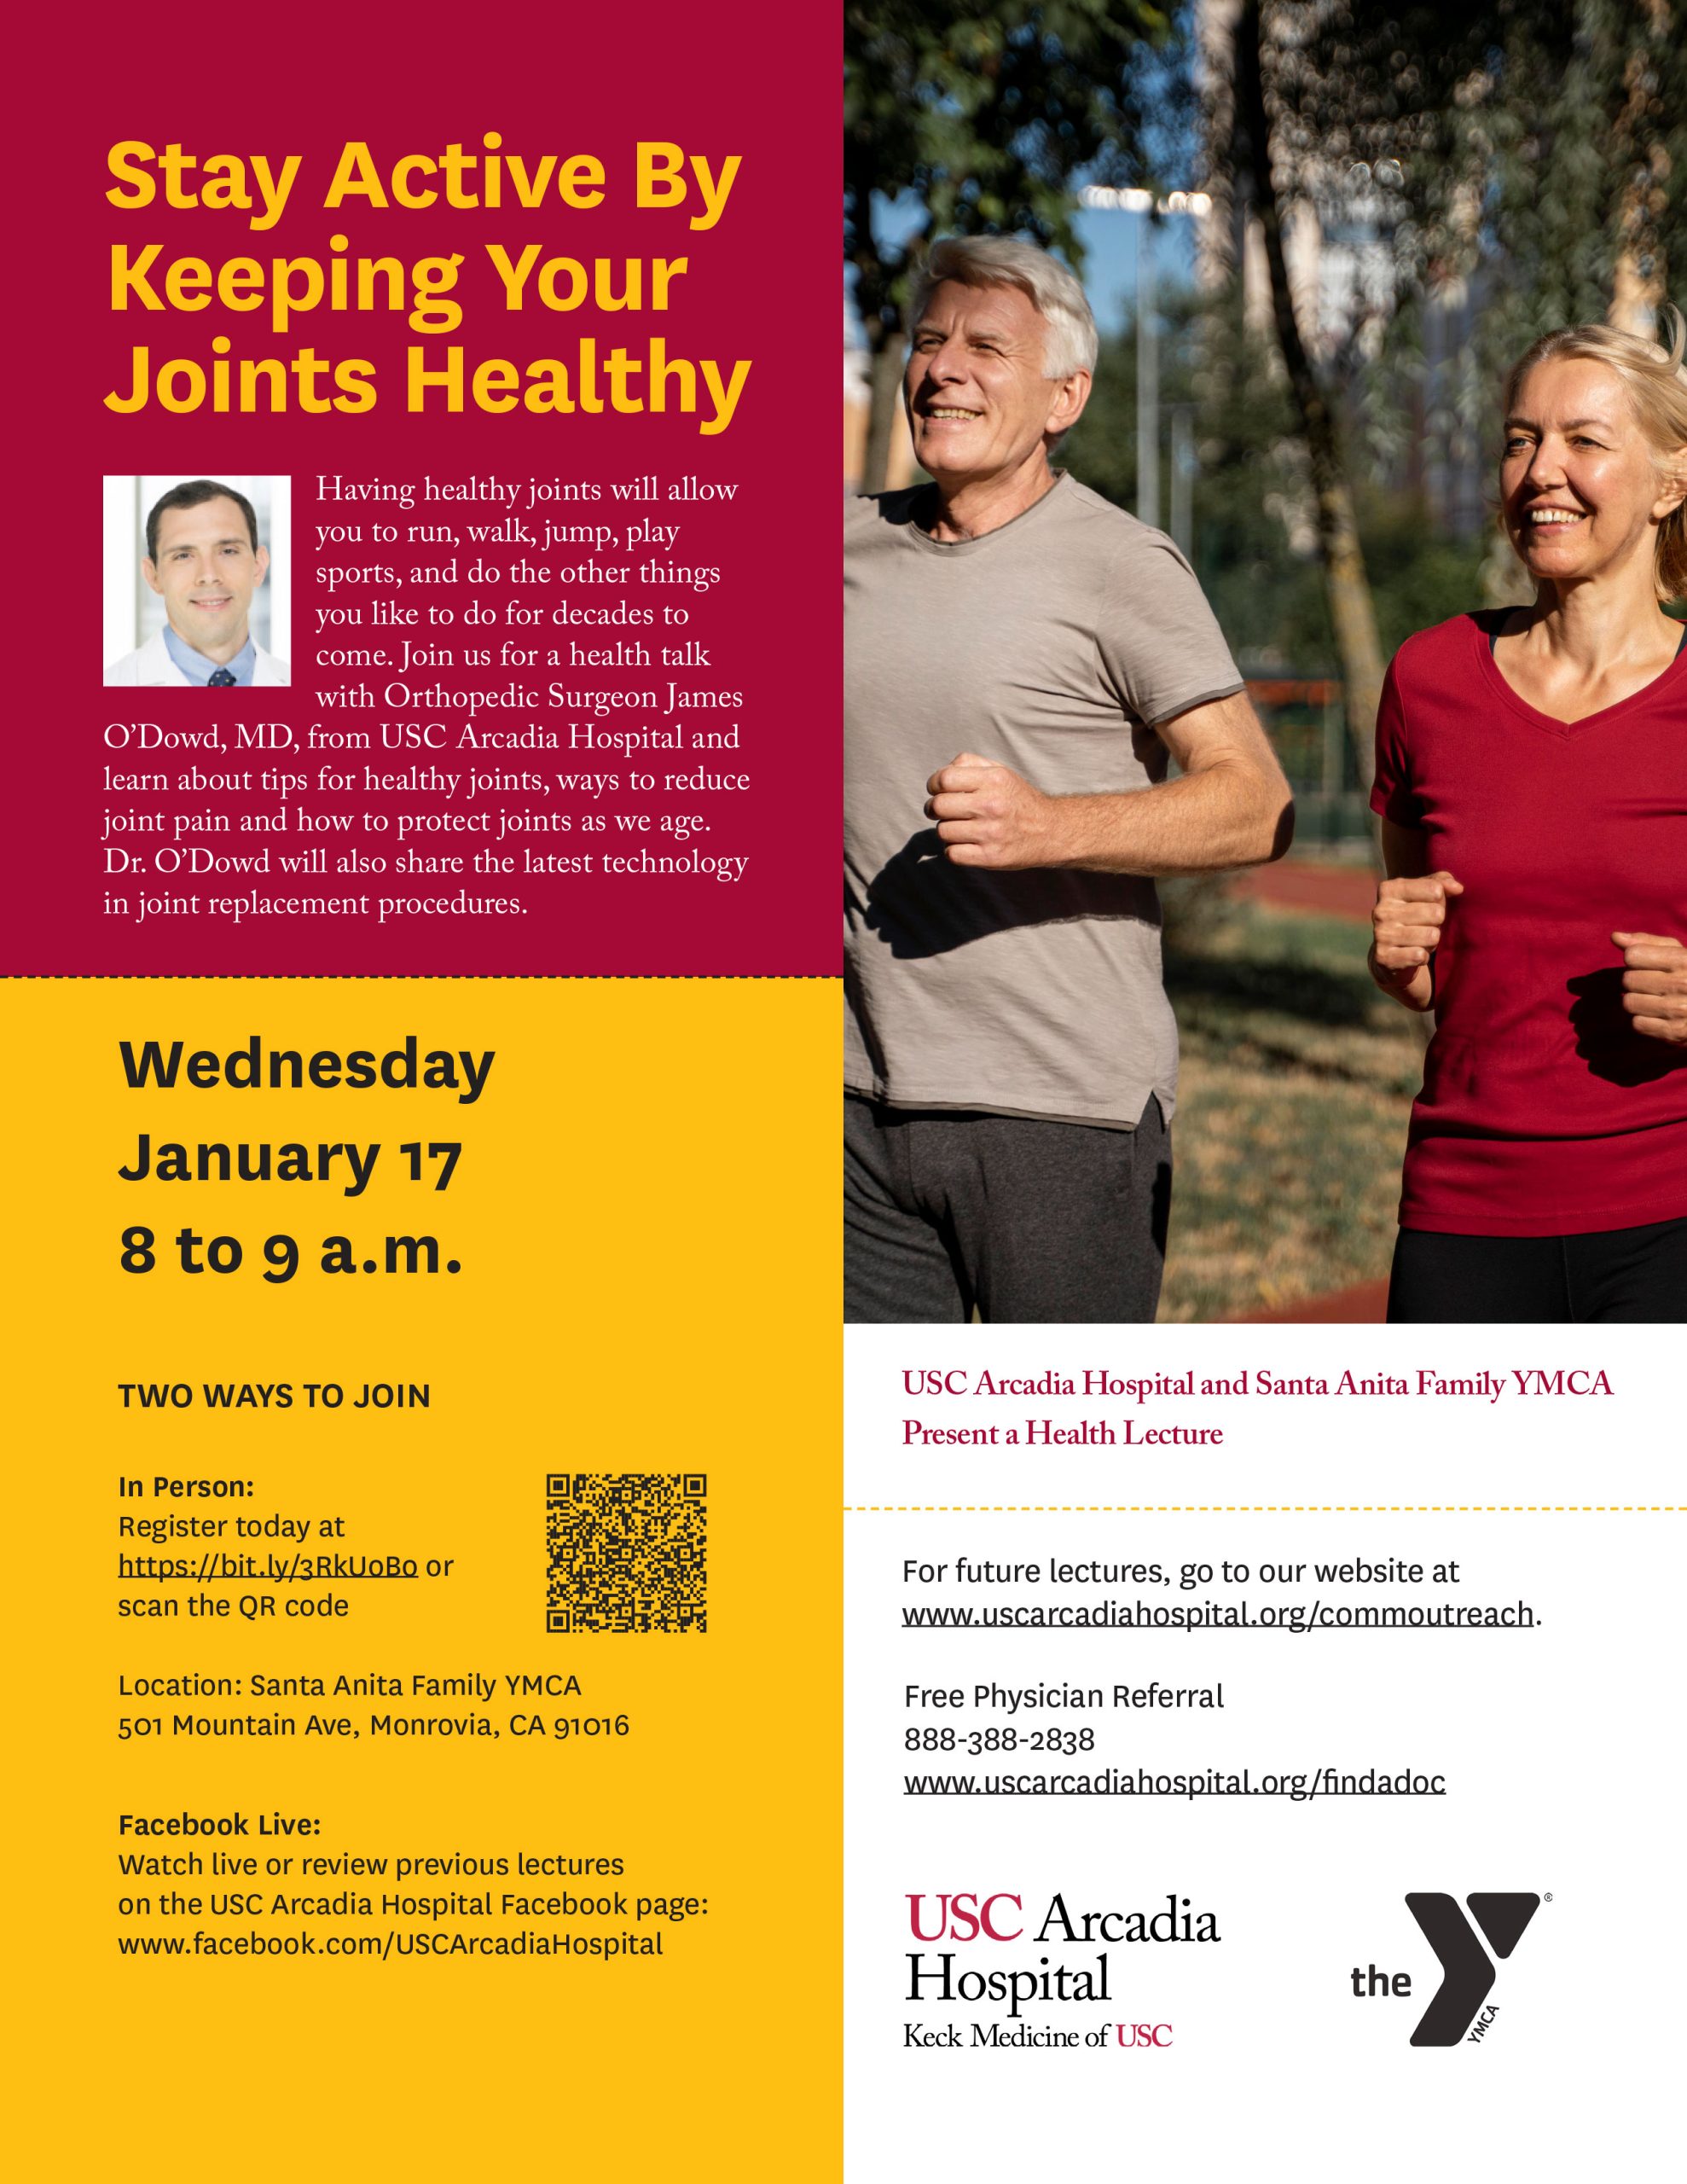 Stay Active by Keeping Your Joints Healthy lecture with USC Arcadia Hospital 